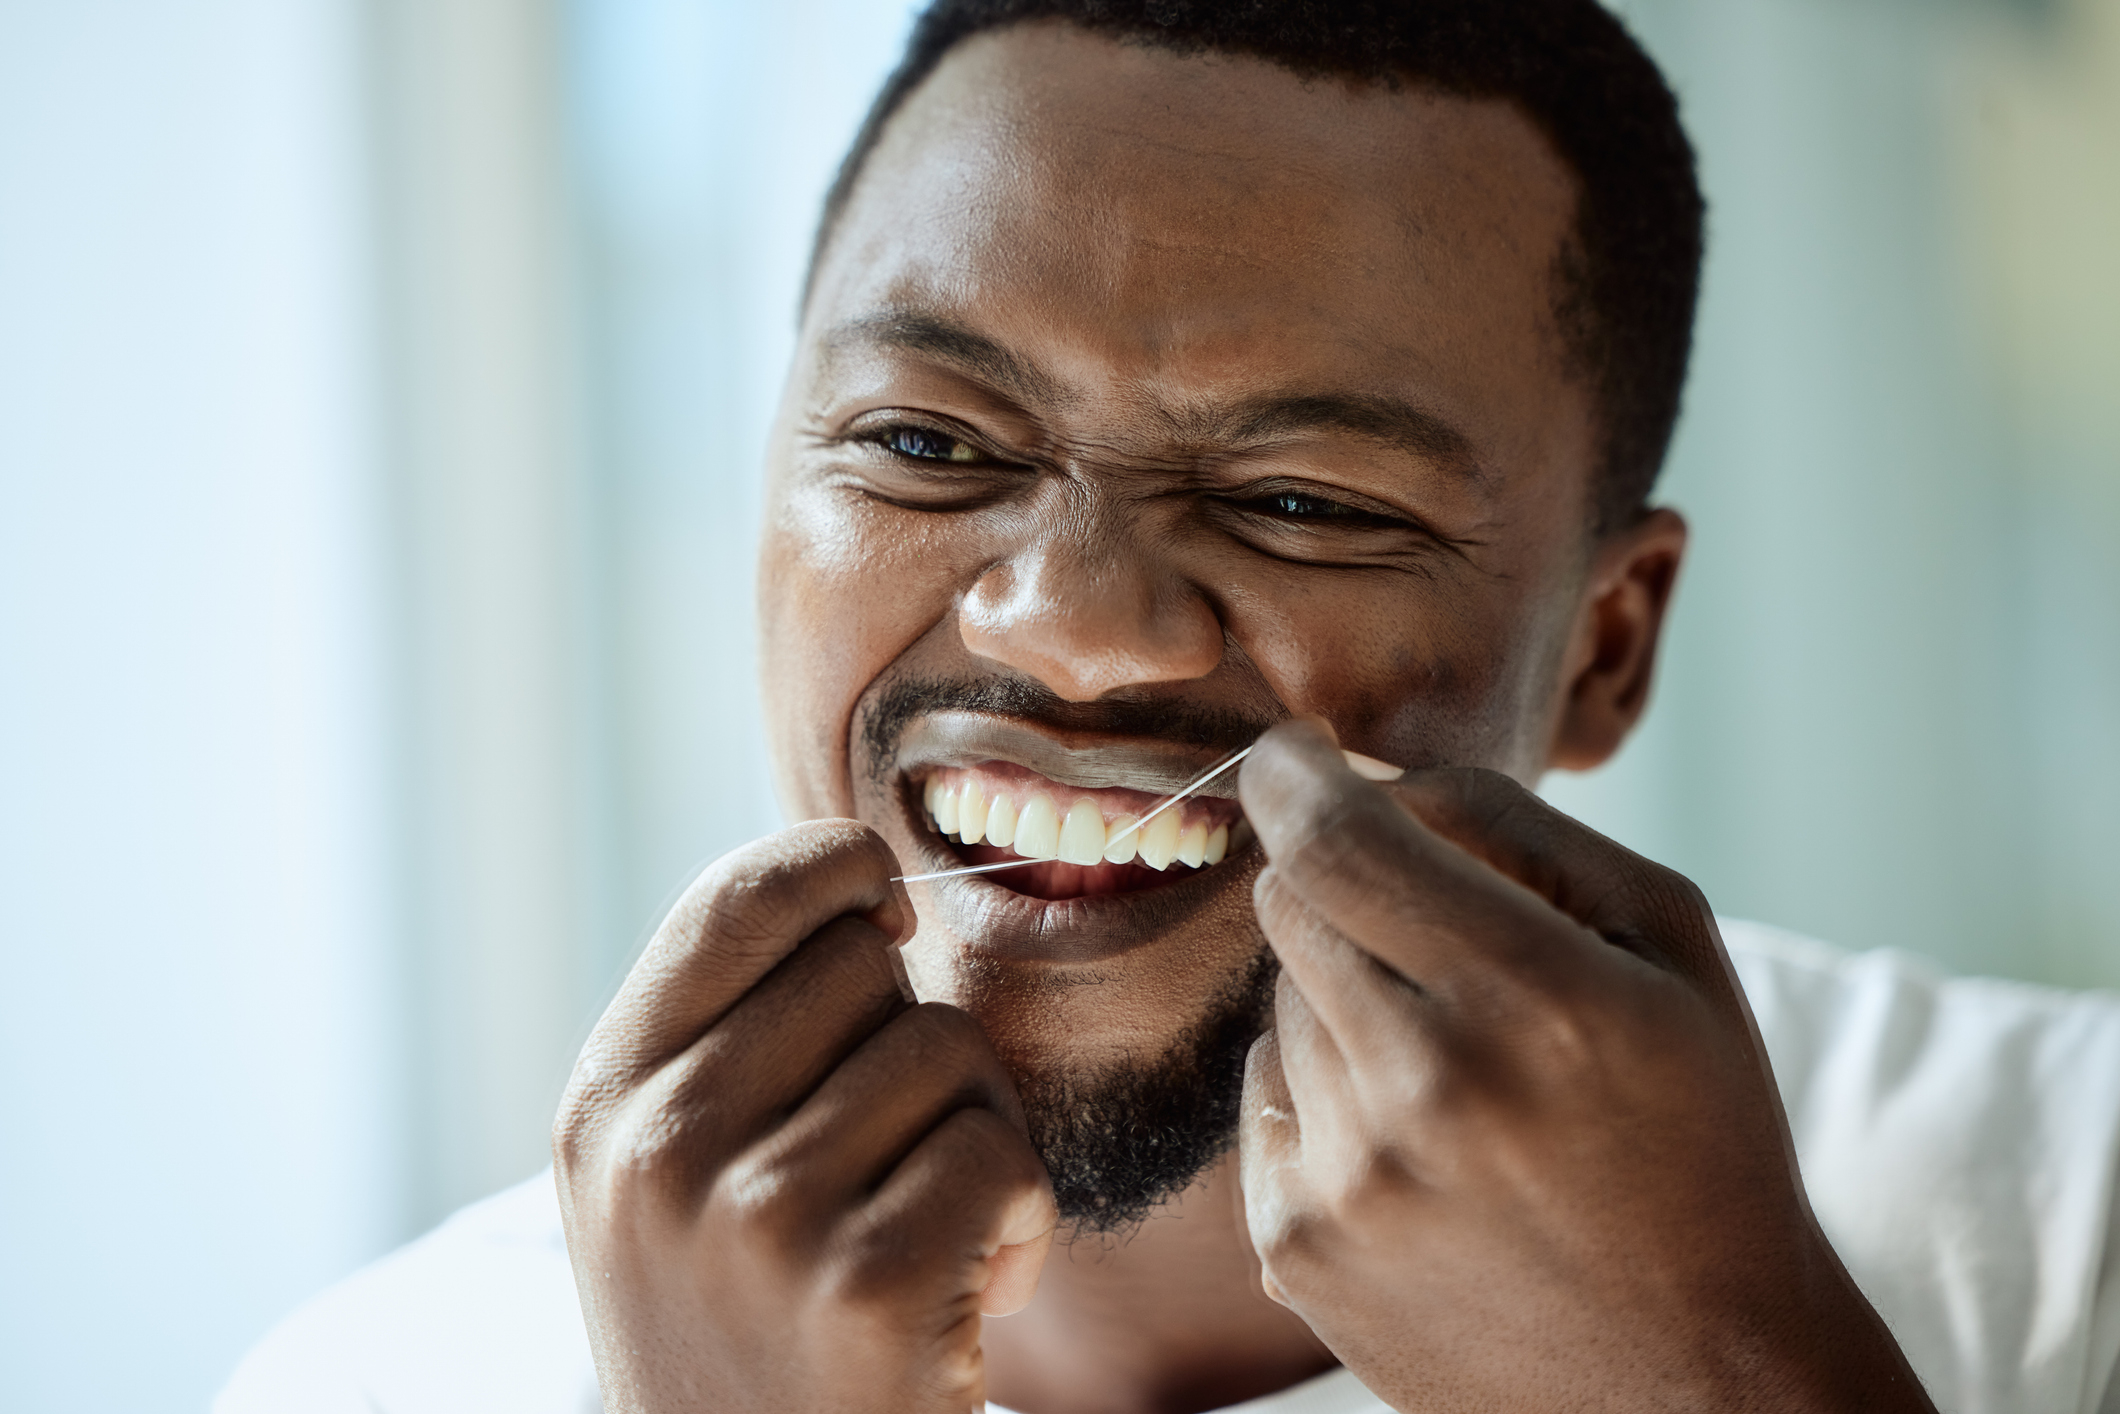 Man flossing his teeth, close-up, smiling, with focus on dental hygiene